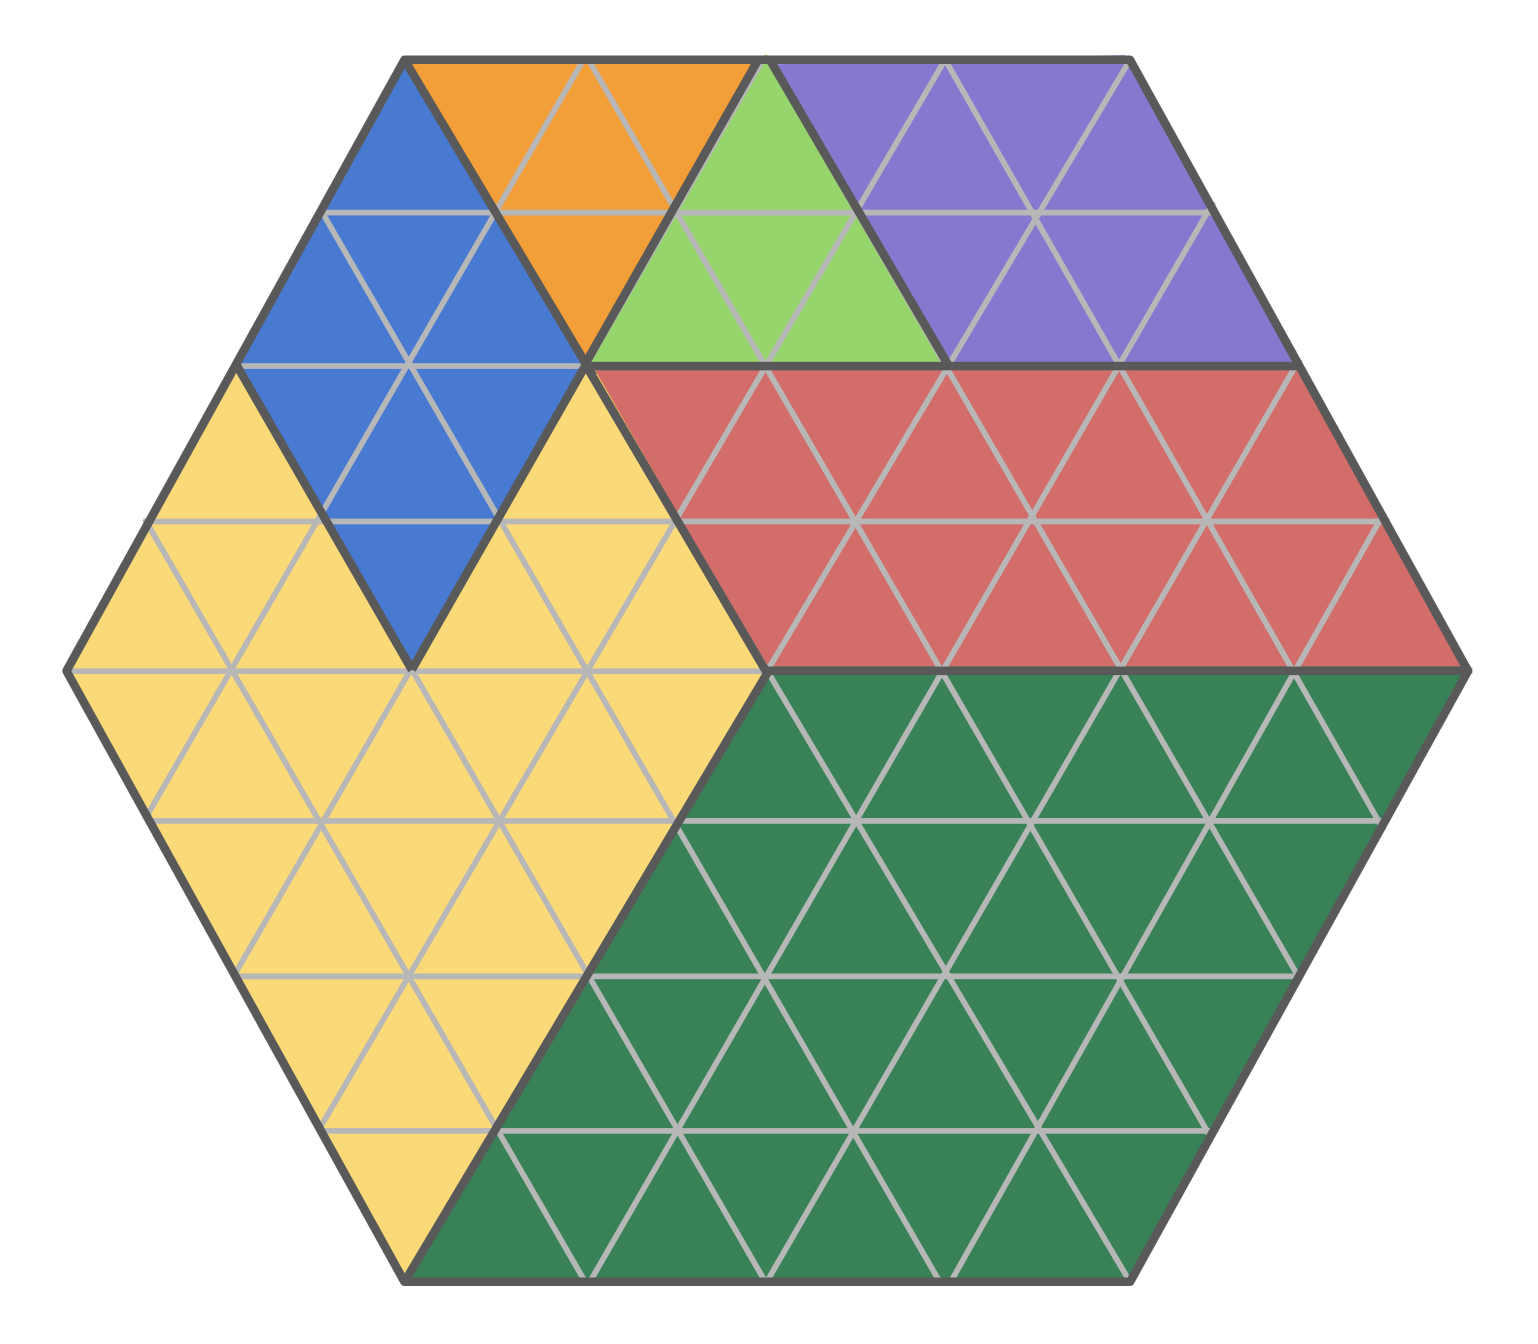 A triangle grid within a hexagon outline (a total of 96 triangles contained within.) The shape is also divided into different coloured fractional parts in a variety of sizes: A yellow heart shape that is 24 triangular units, a large green rhombus that is 32 triangular units, smaller blue and purple rhombuses that are 8 triangular units each, a red parallelogram that is 16 triangular units, and small orange and green triangle that are 4 triangular units each.